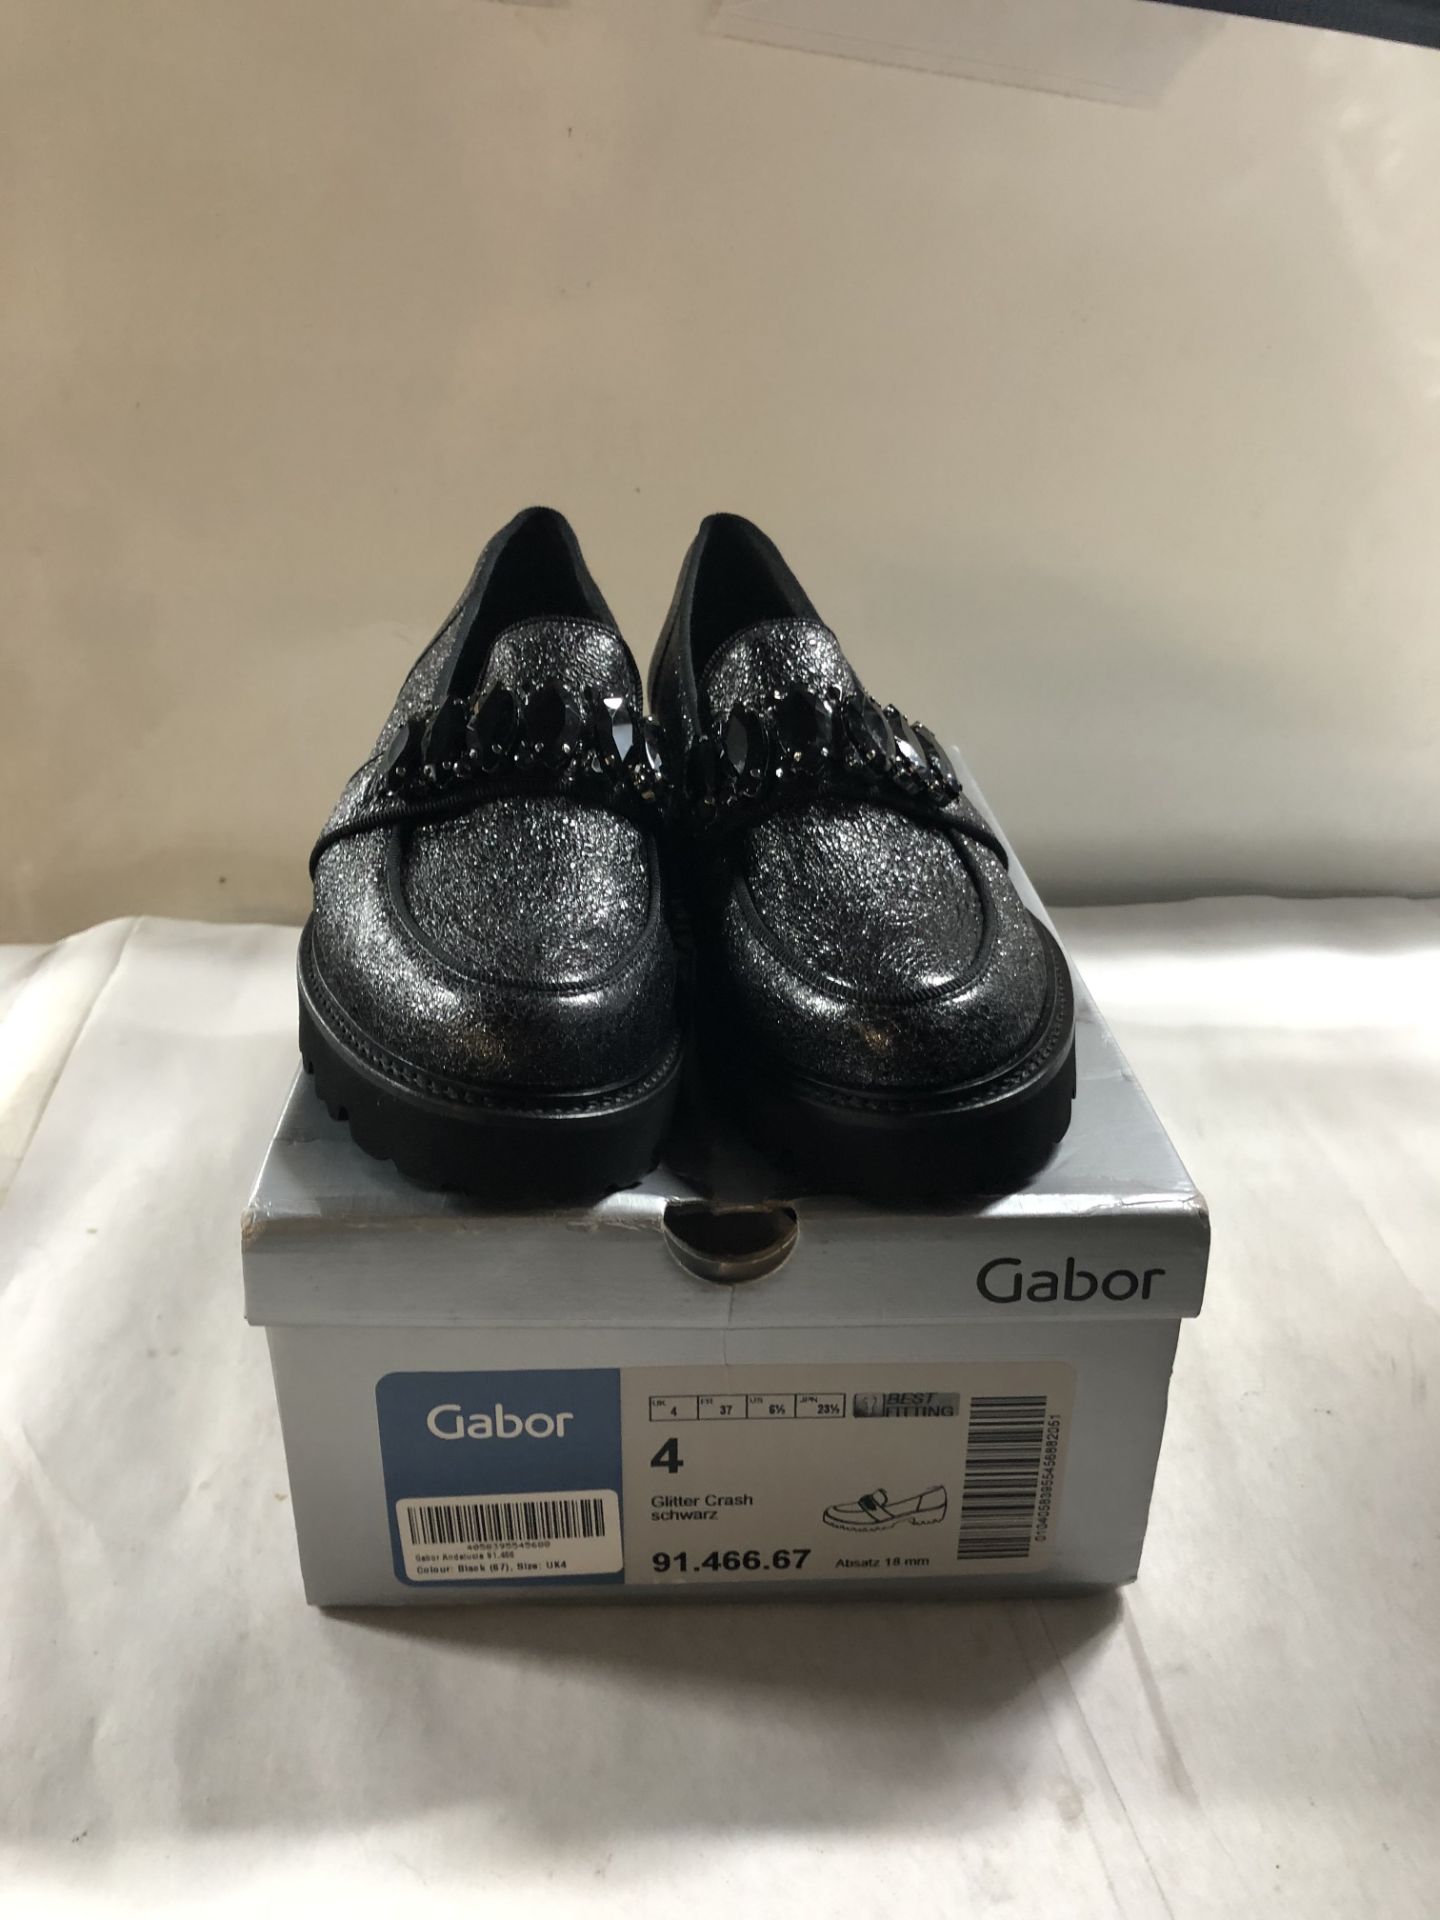 Gabor Loafers. UK 4